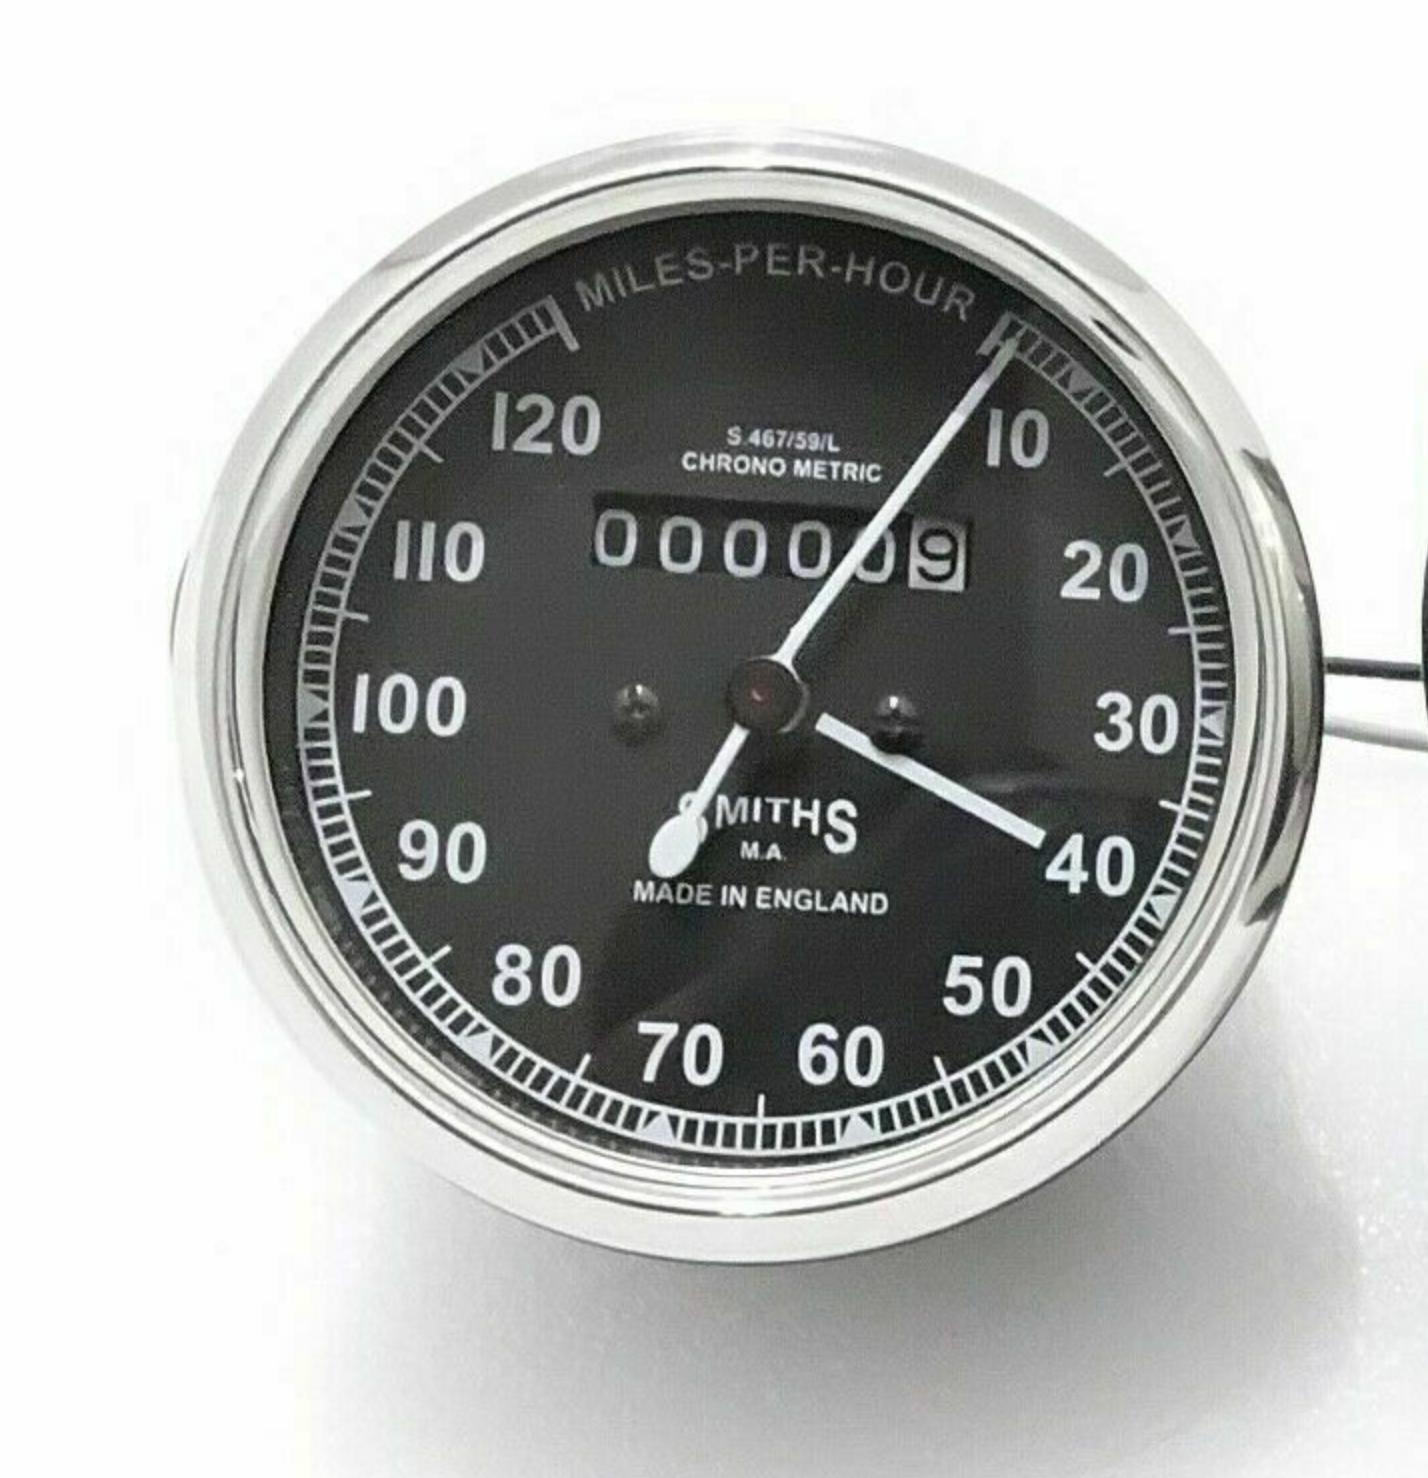 Brand New Vintage Replica Smith 0-120 Miles Speedometer Fit For Royal Enfield Bullet Early Models